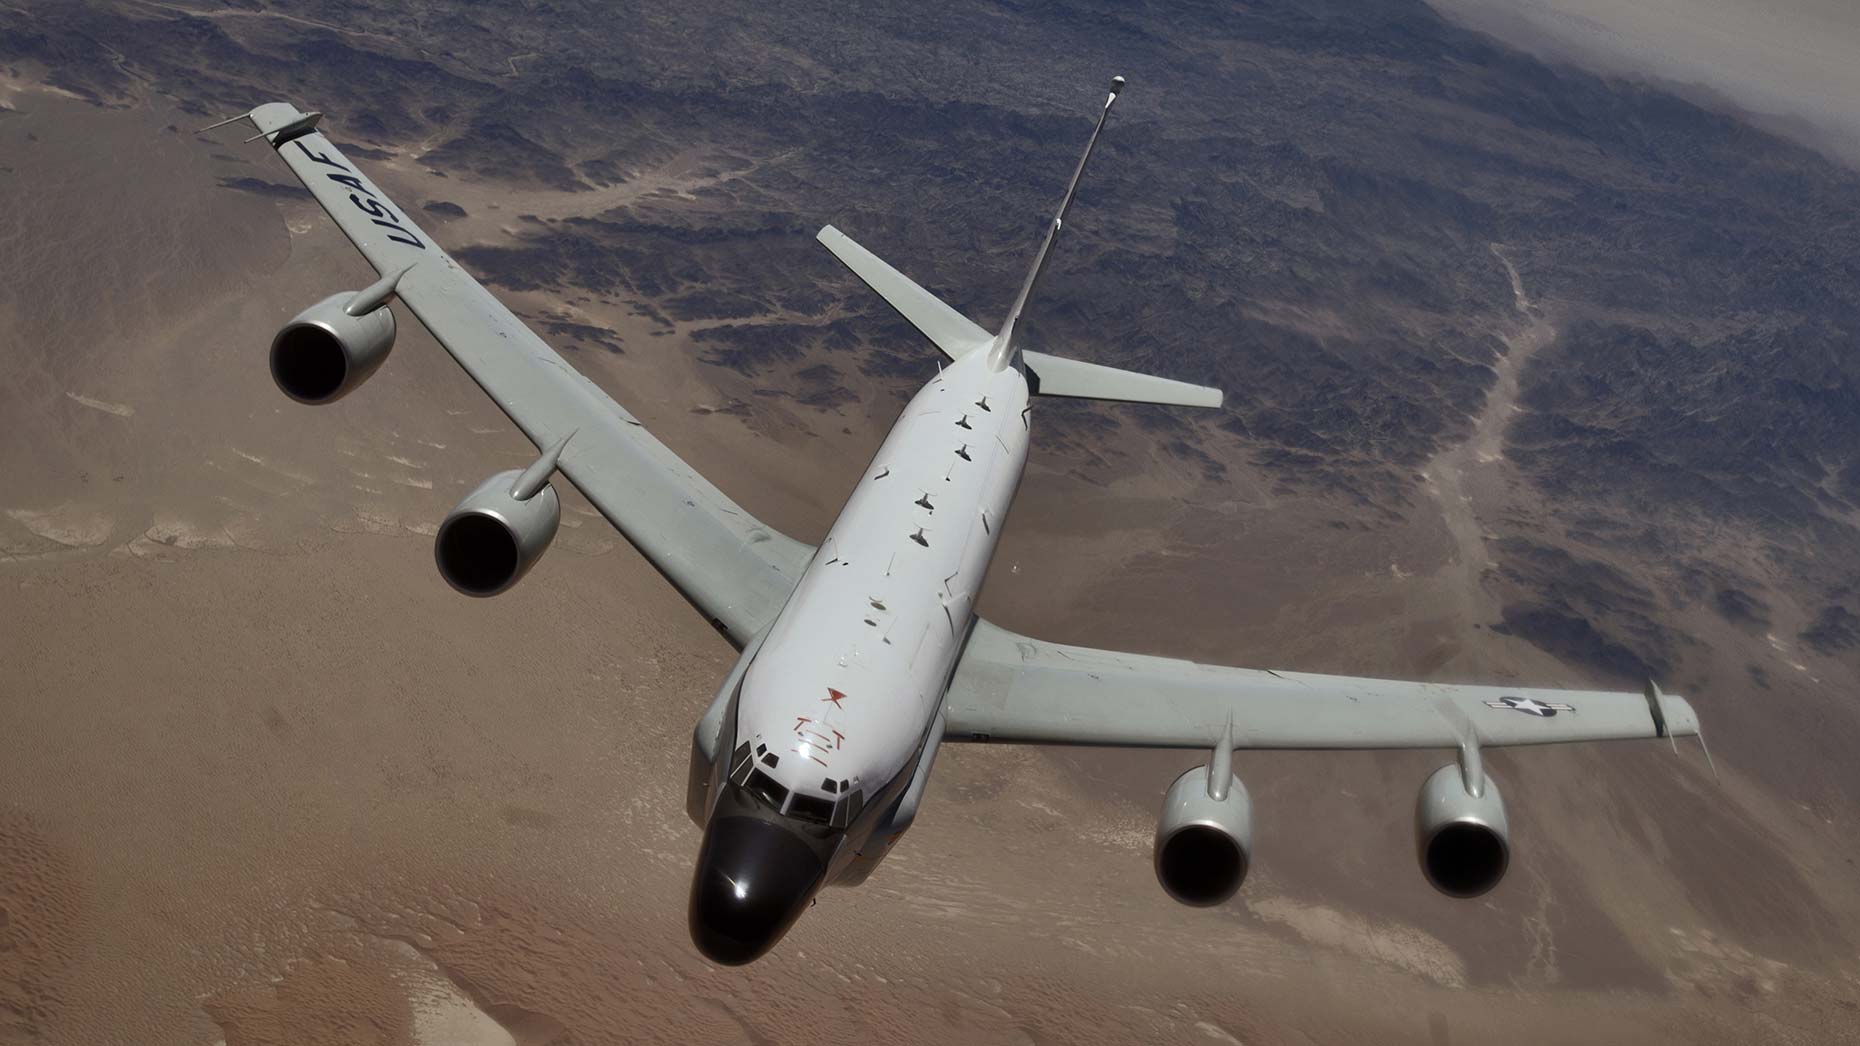 A US Air Force RC-135 Rivet Joint reconnaissance aircraft moves into position behind a KC-135T/R Stratotanker for an aerial refueling at a speed greater than 250 knots over Southwest Asia. Photo: US Department of Defense